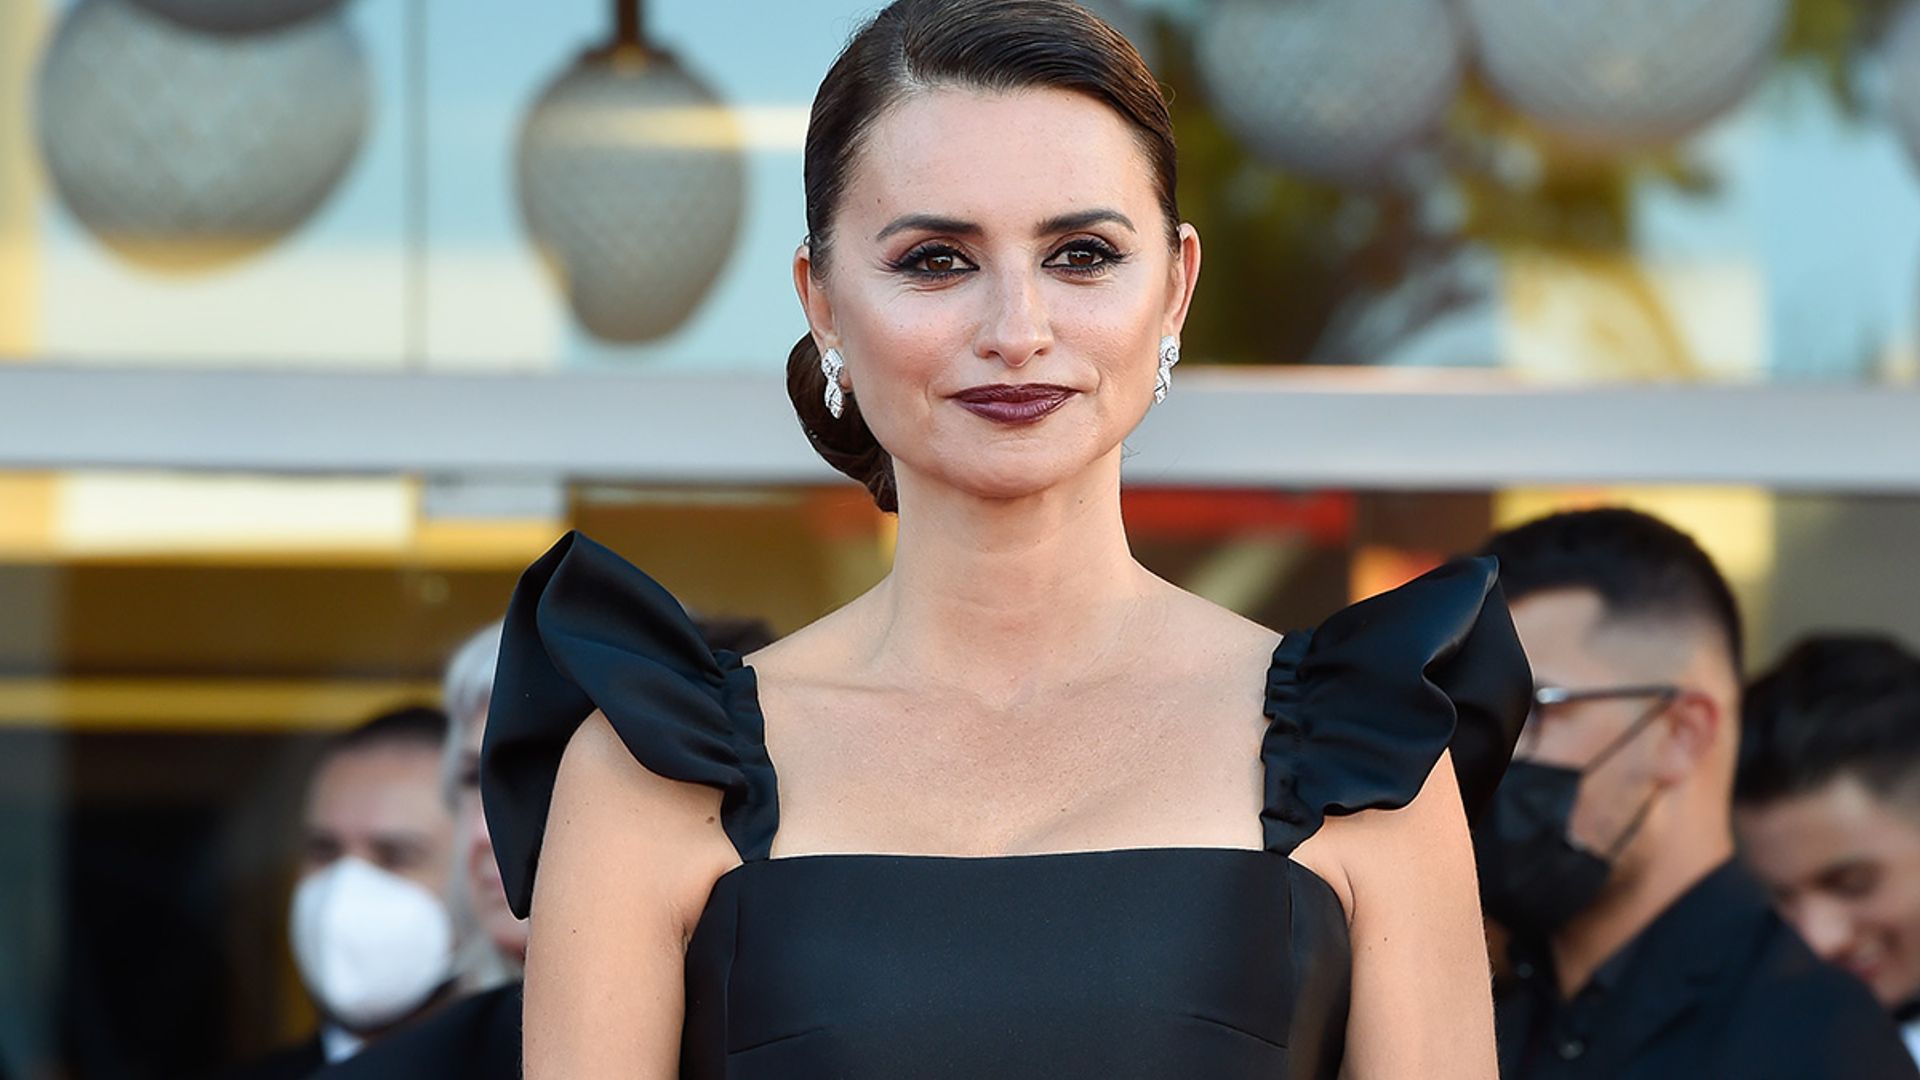 Penelope Cruz steals the show in jaw-dropping pink ensemble